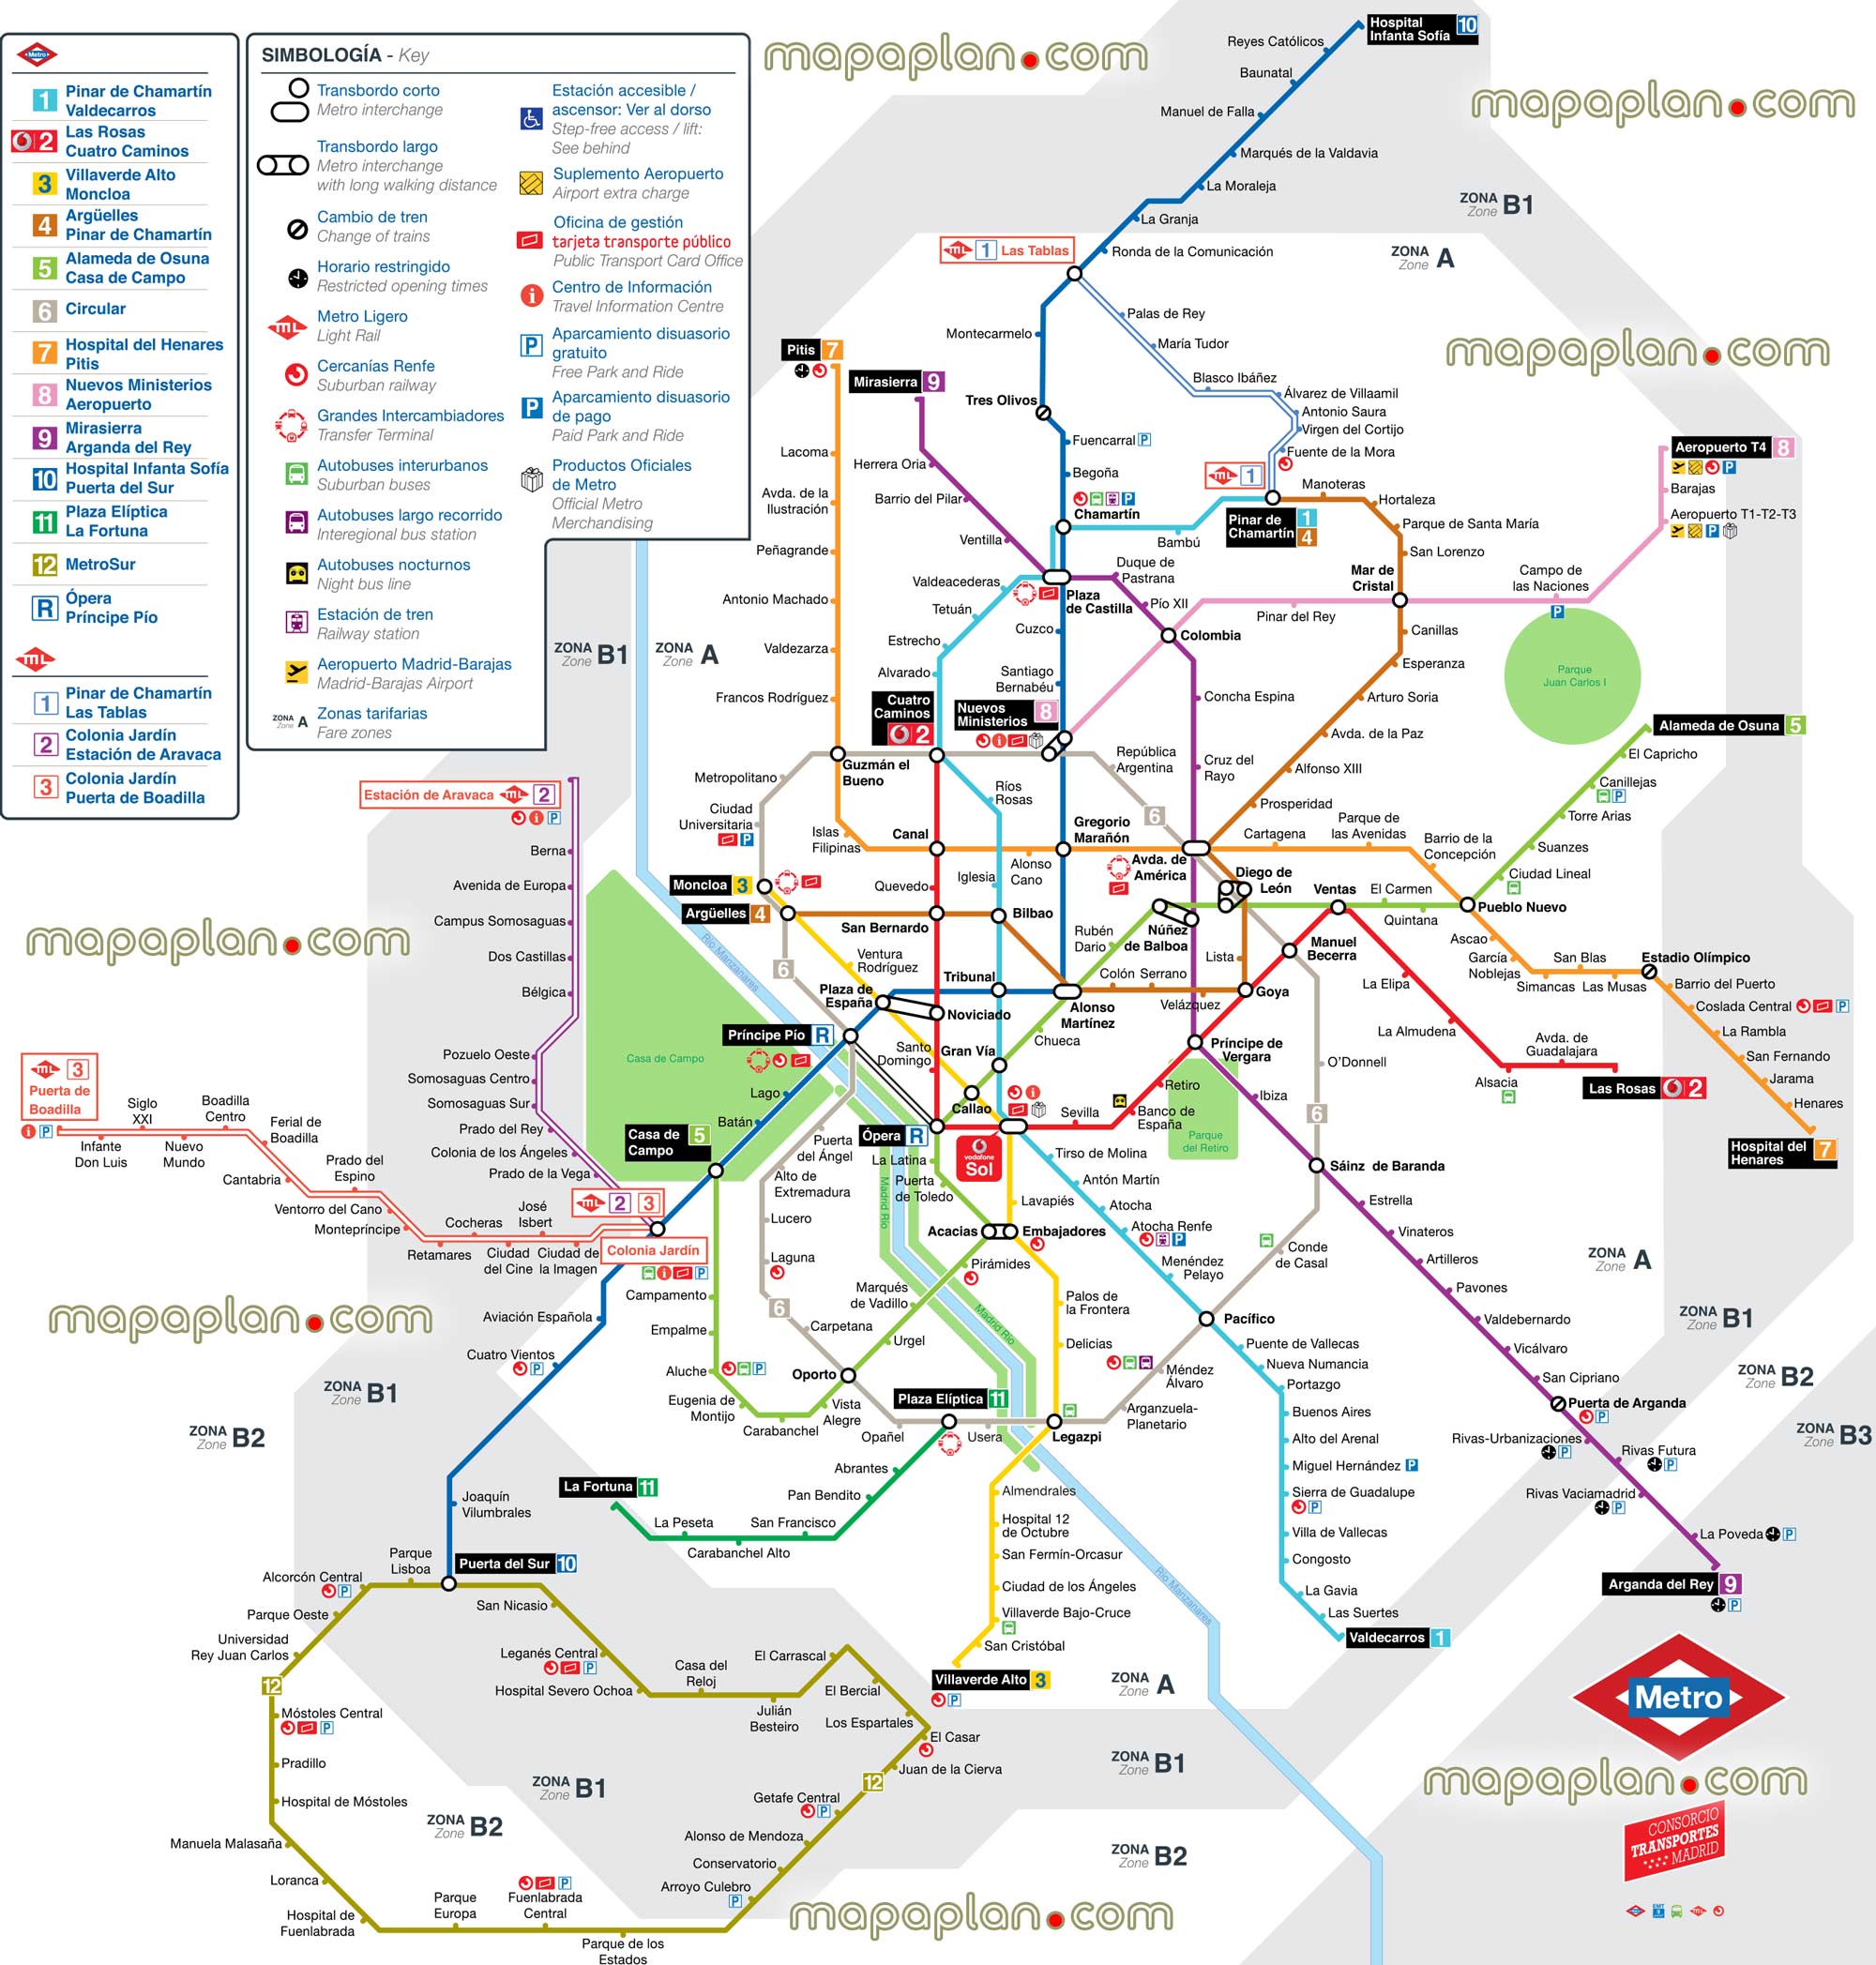 map metro light rail network red de metro metro ligero public transportation english spanish railway stations routes stops subway tube zones numbers diagram carcanias suburban train lines network barajas airport terminal 1 4s Madrid Top tourist attractions map